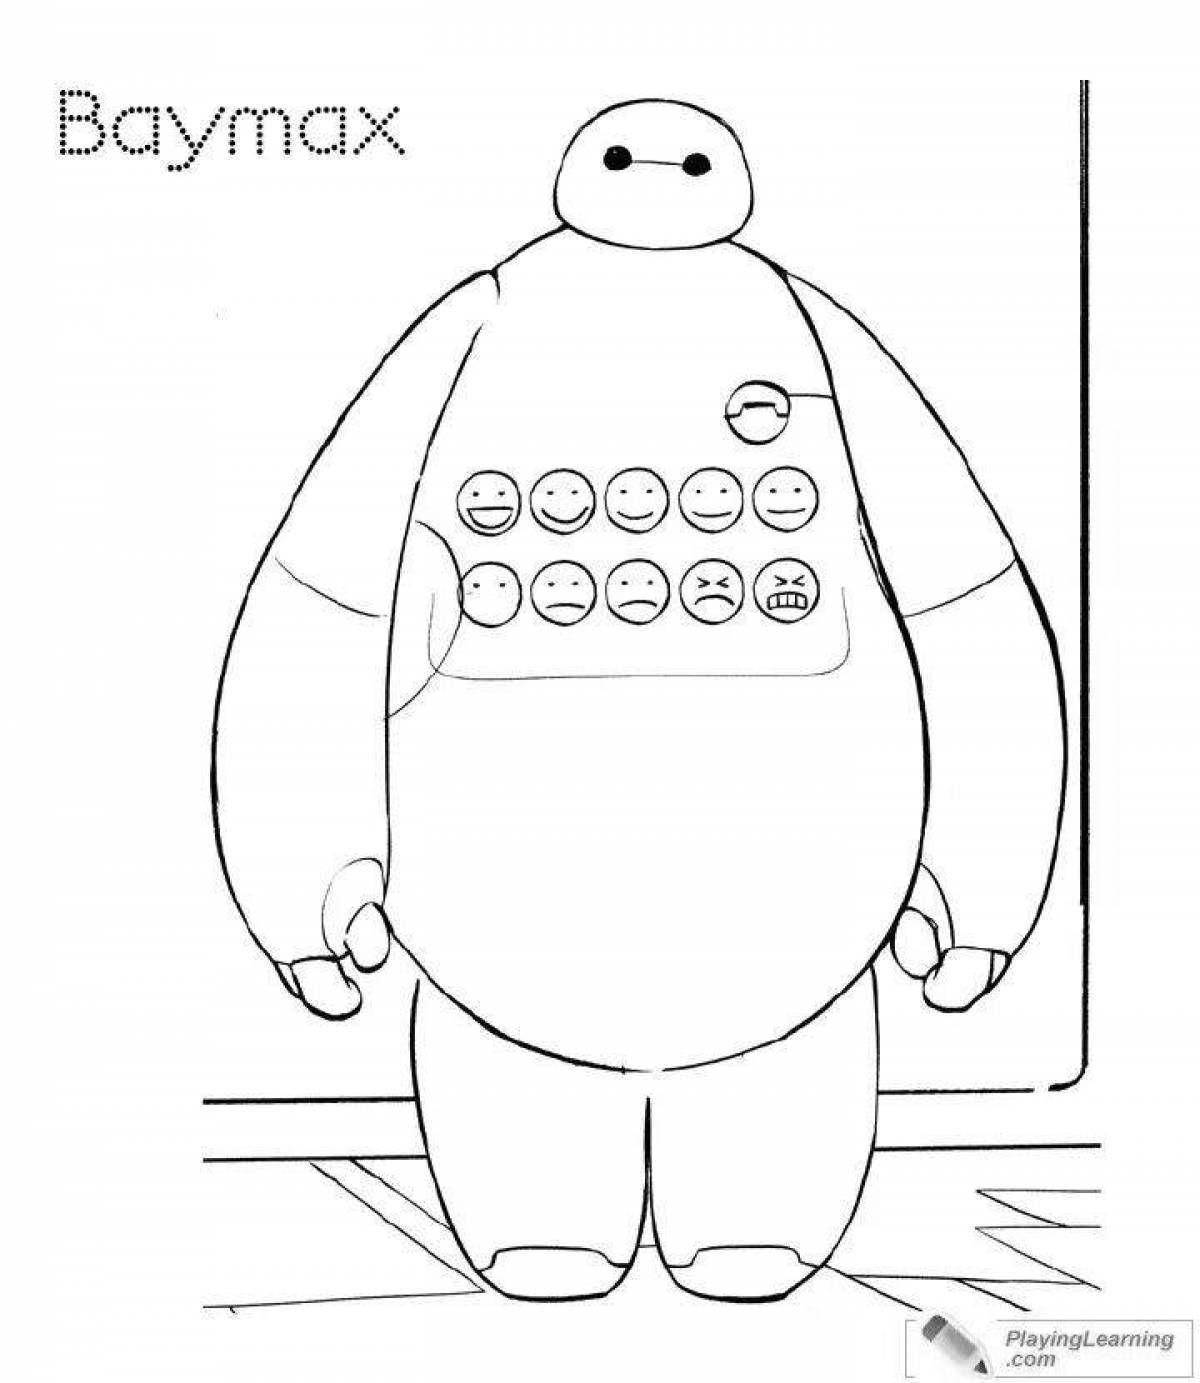 Colorful baymax coloring page